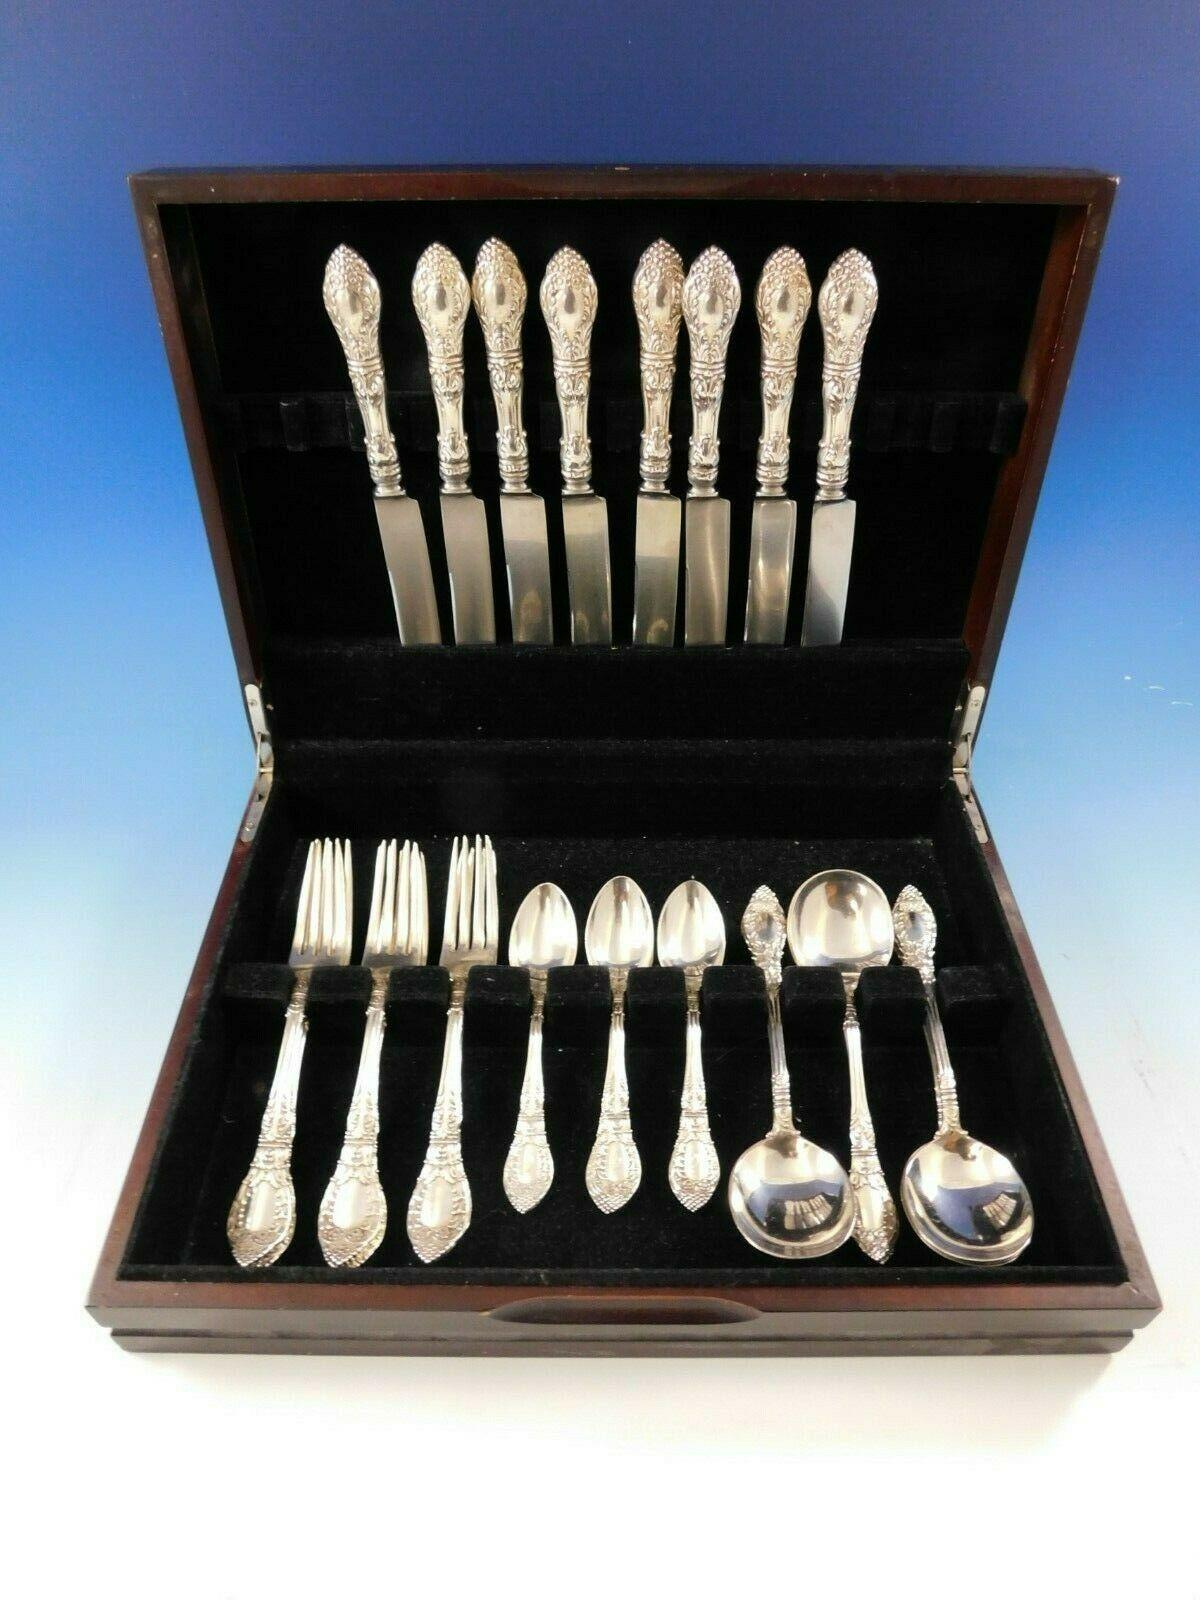 Dinner size Roman by Knowles sterling silver flatware set, 32 pieces. This set includes:

8 dinner size knives, 9 3/4